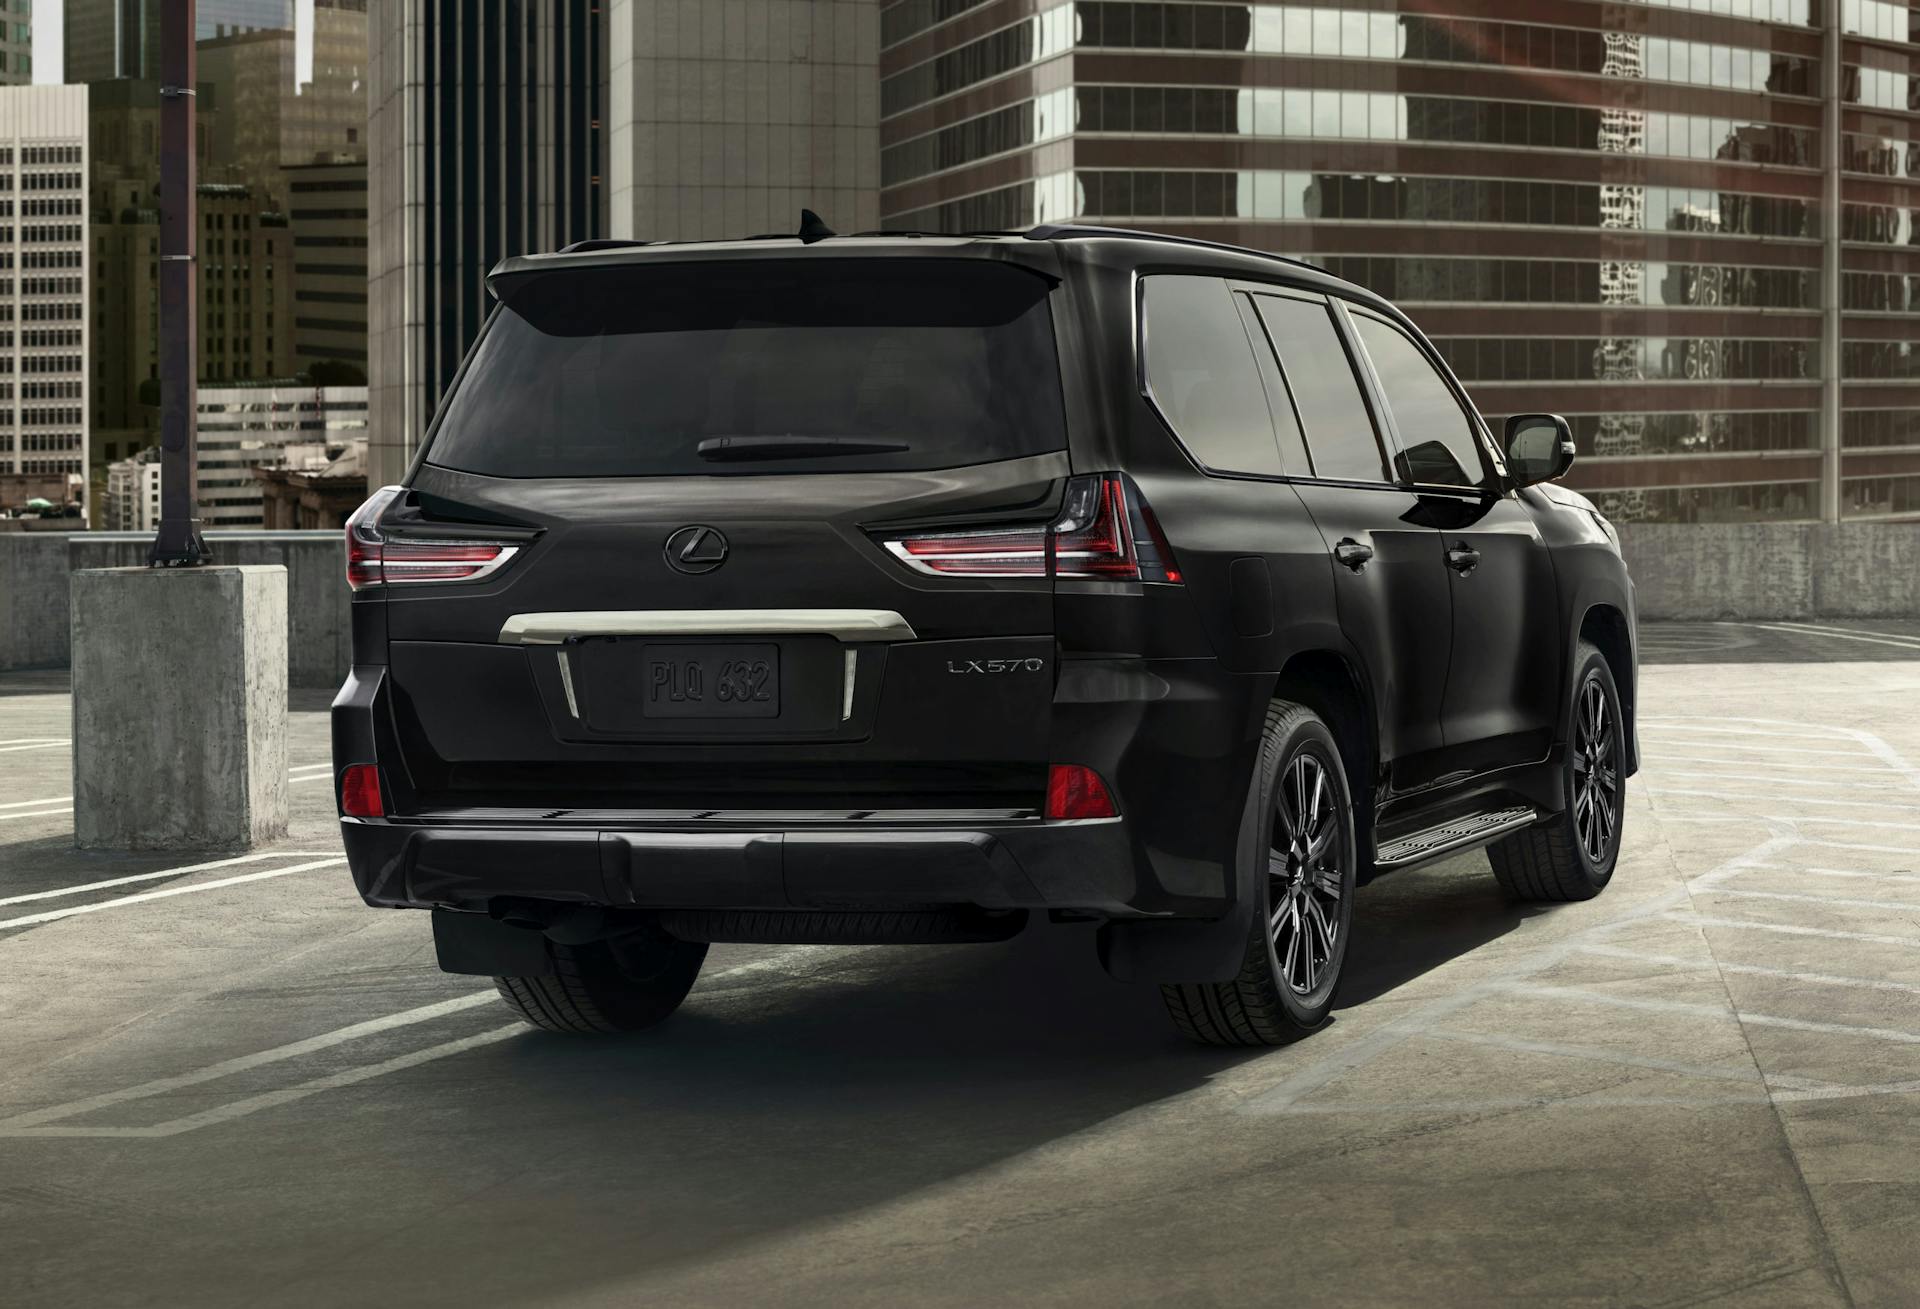 2023 Lexus LX The Land Cruiser’s more luxurious sibling is poised to